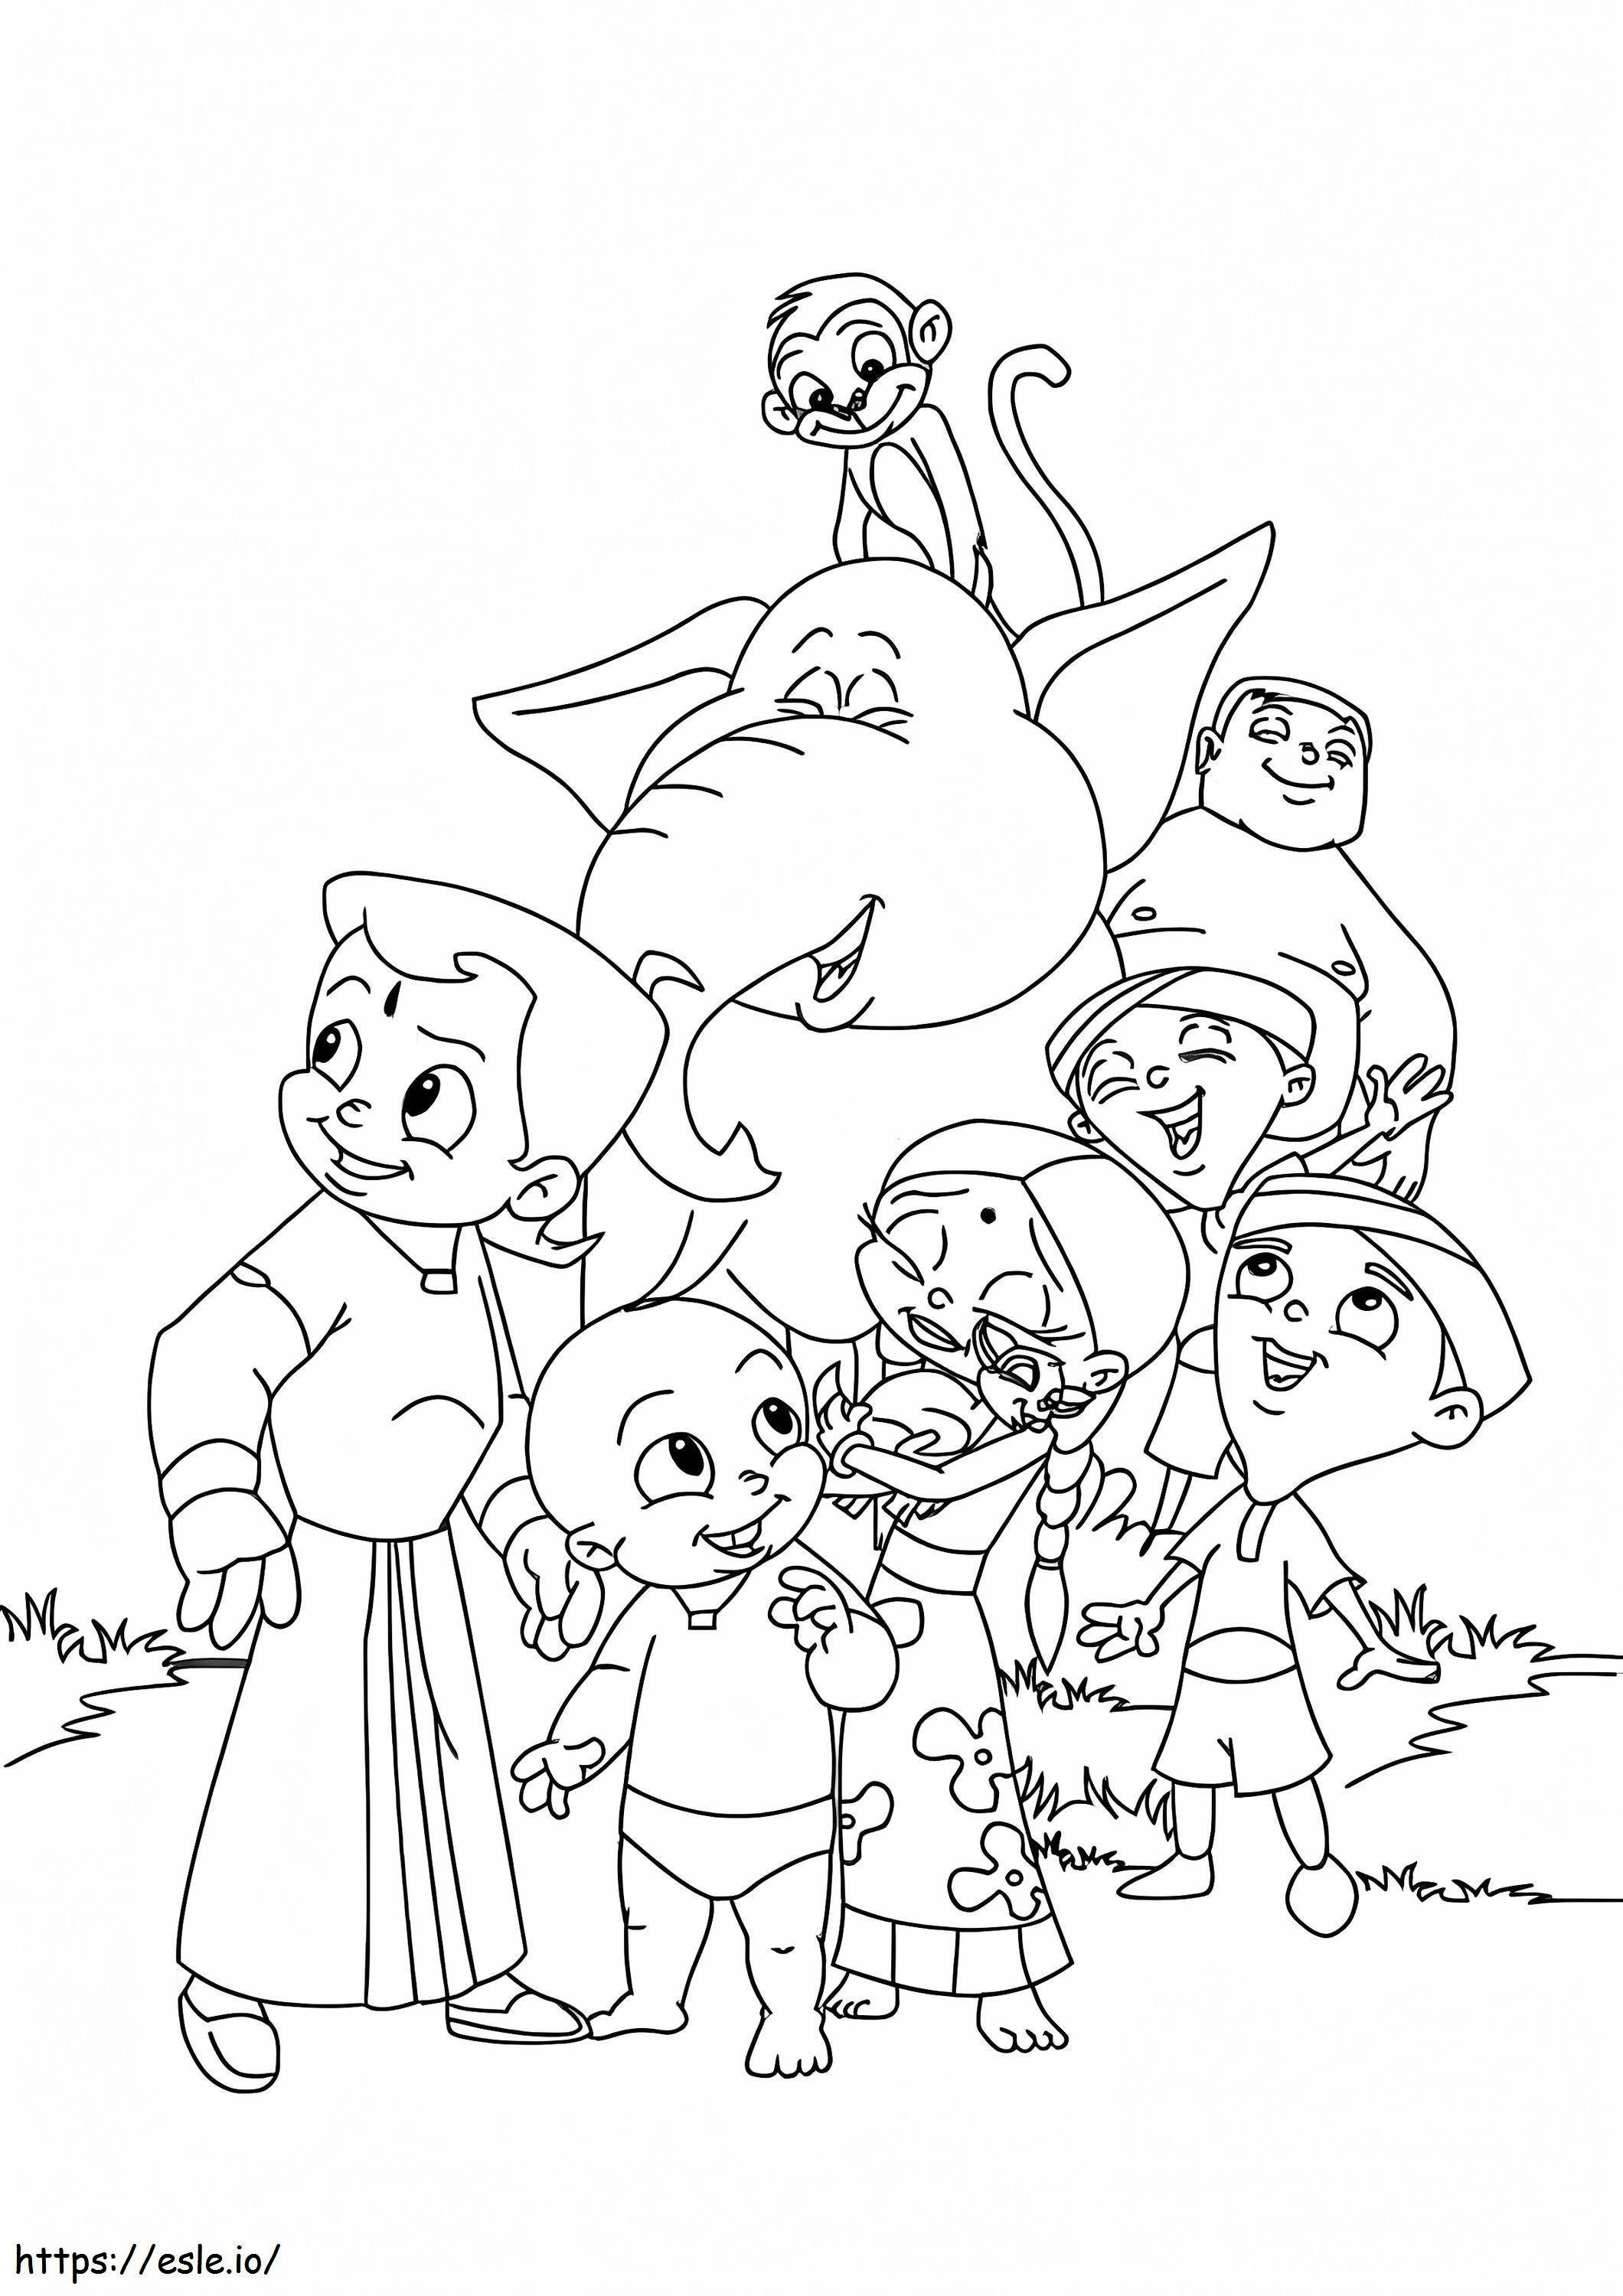 Chhota Bheem And Funny Friend coloring page